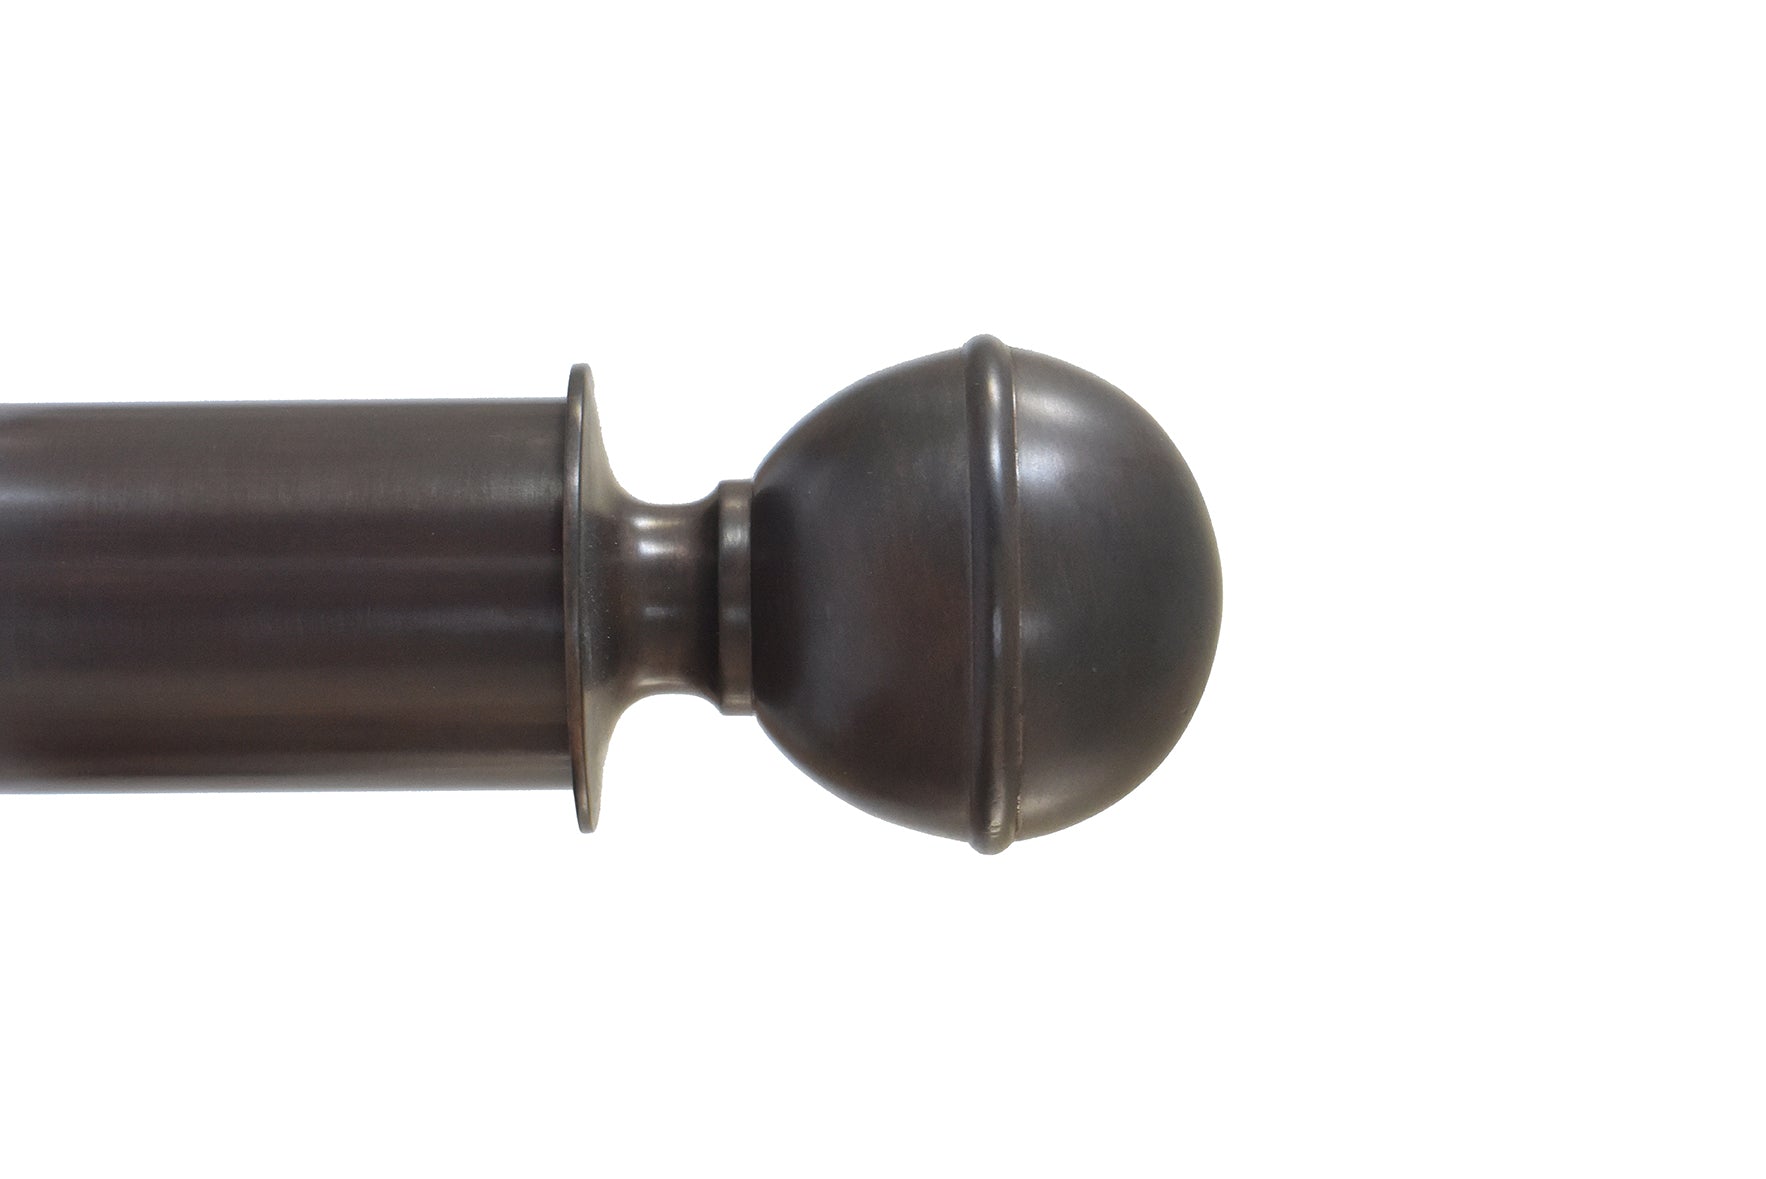 Tillys Classic One Rib Ball Finial Curtain Pole Set in Bronze